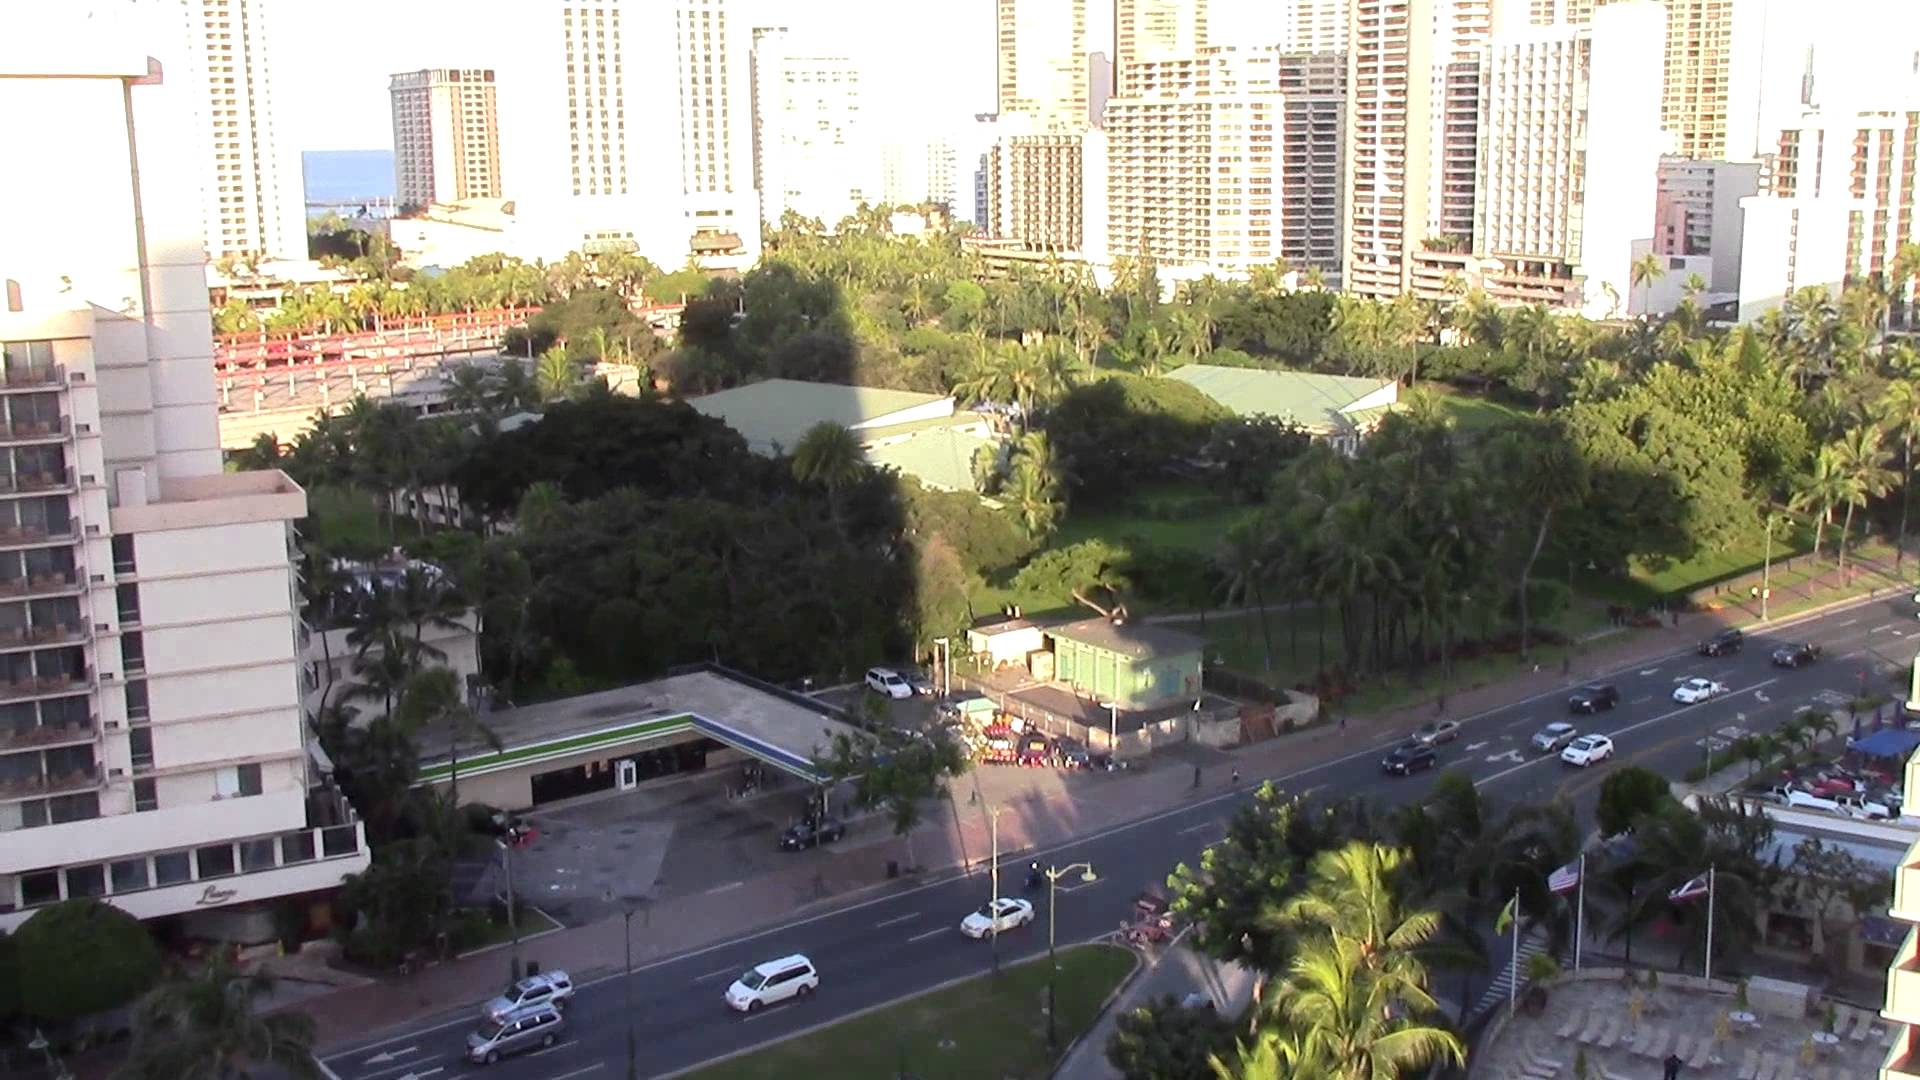 Quiet View from the Honolulu Hotel Balcony